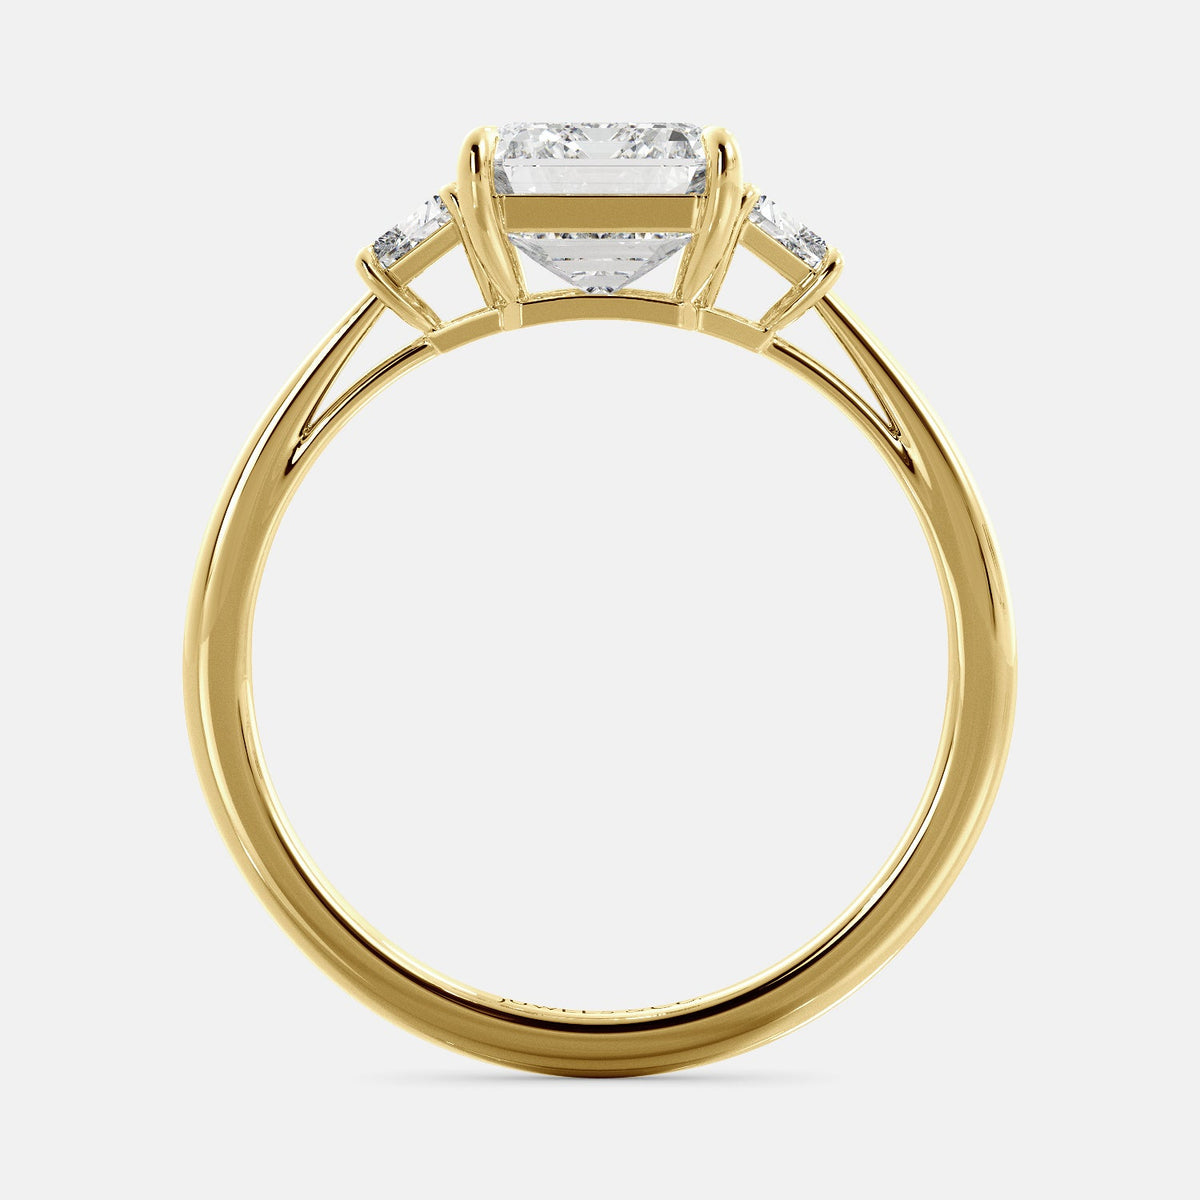 Lab-grown Emerald Cut Diamond Ring with side baguettes, yellow gold 14K